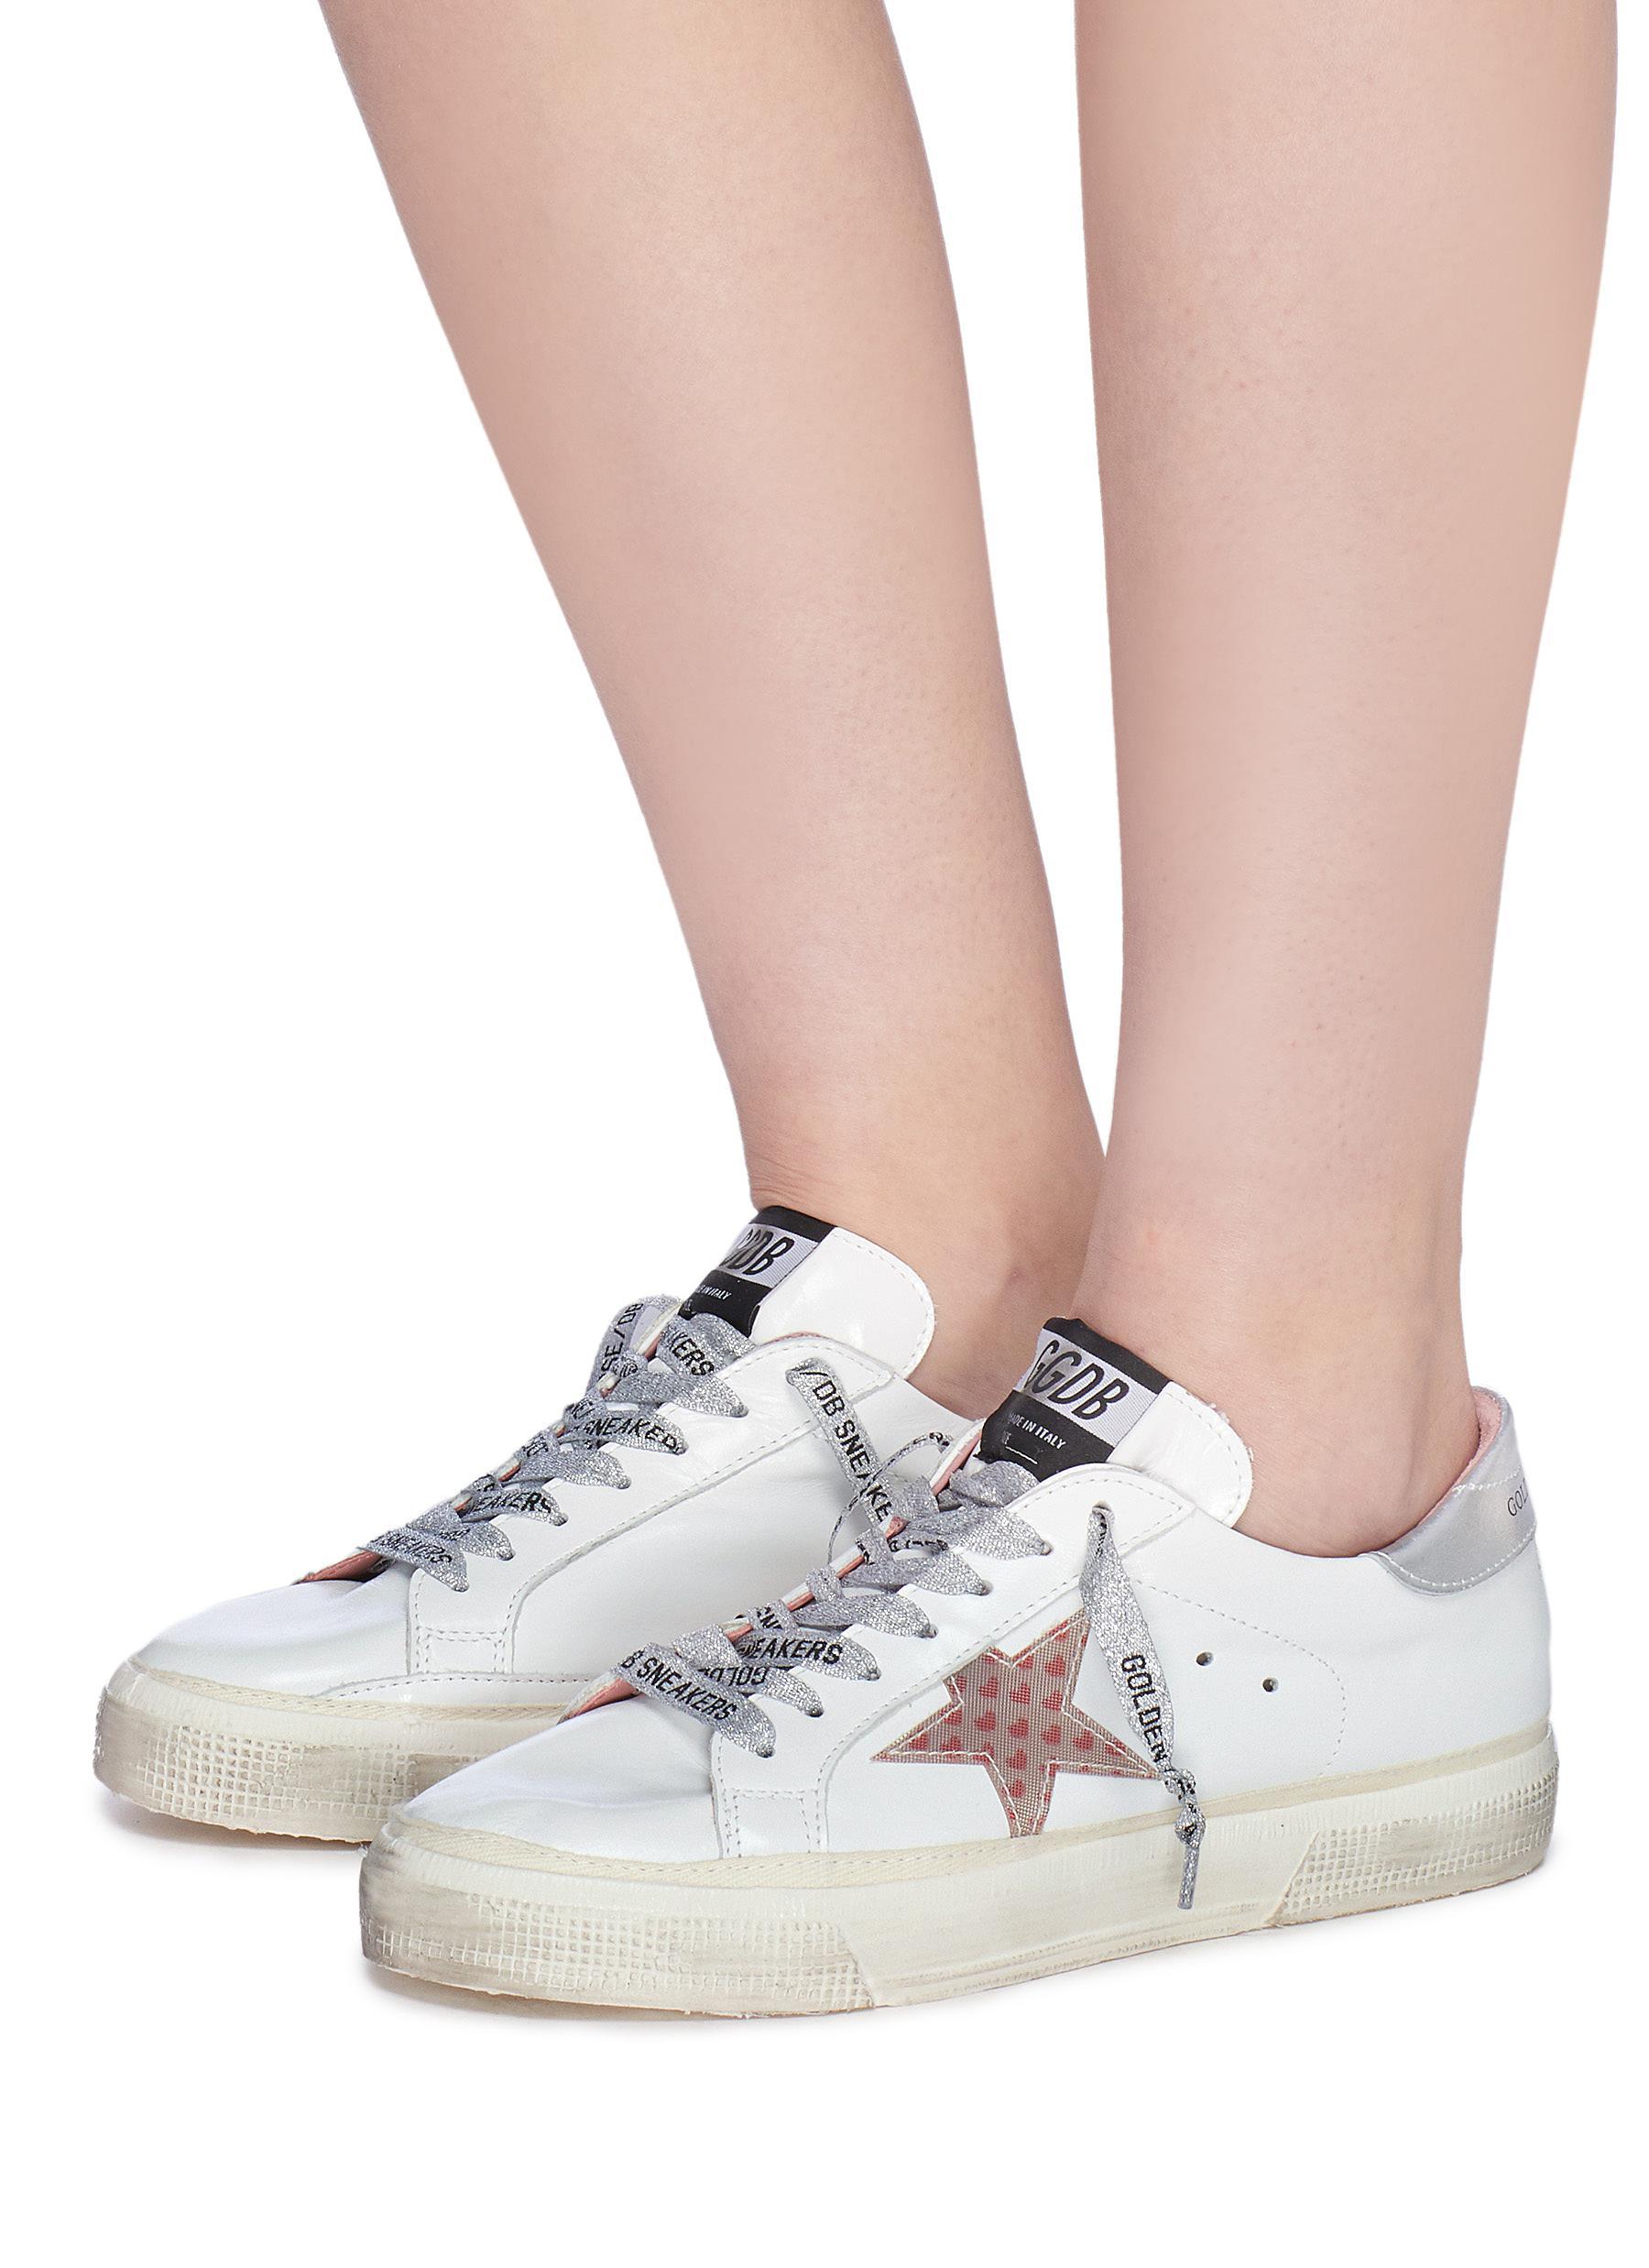 Golden Goose 'may' Print Star Leather Sneakers in - Lyst